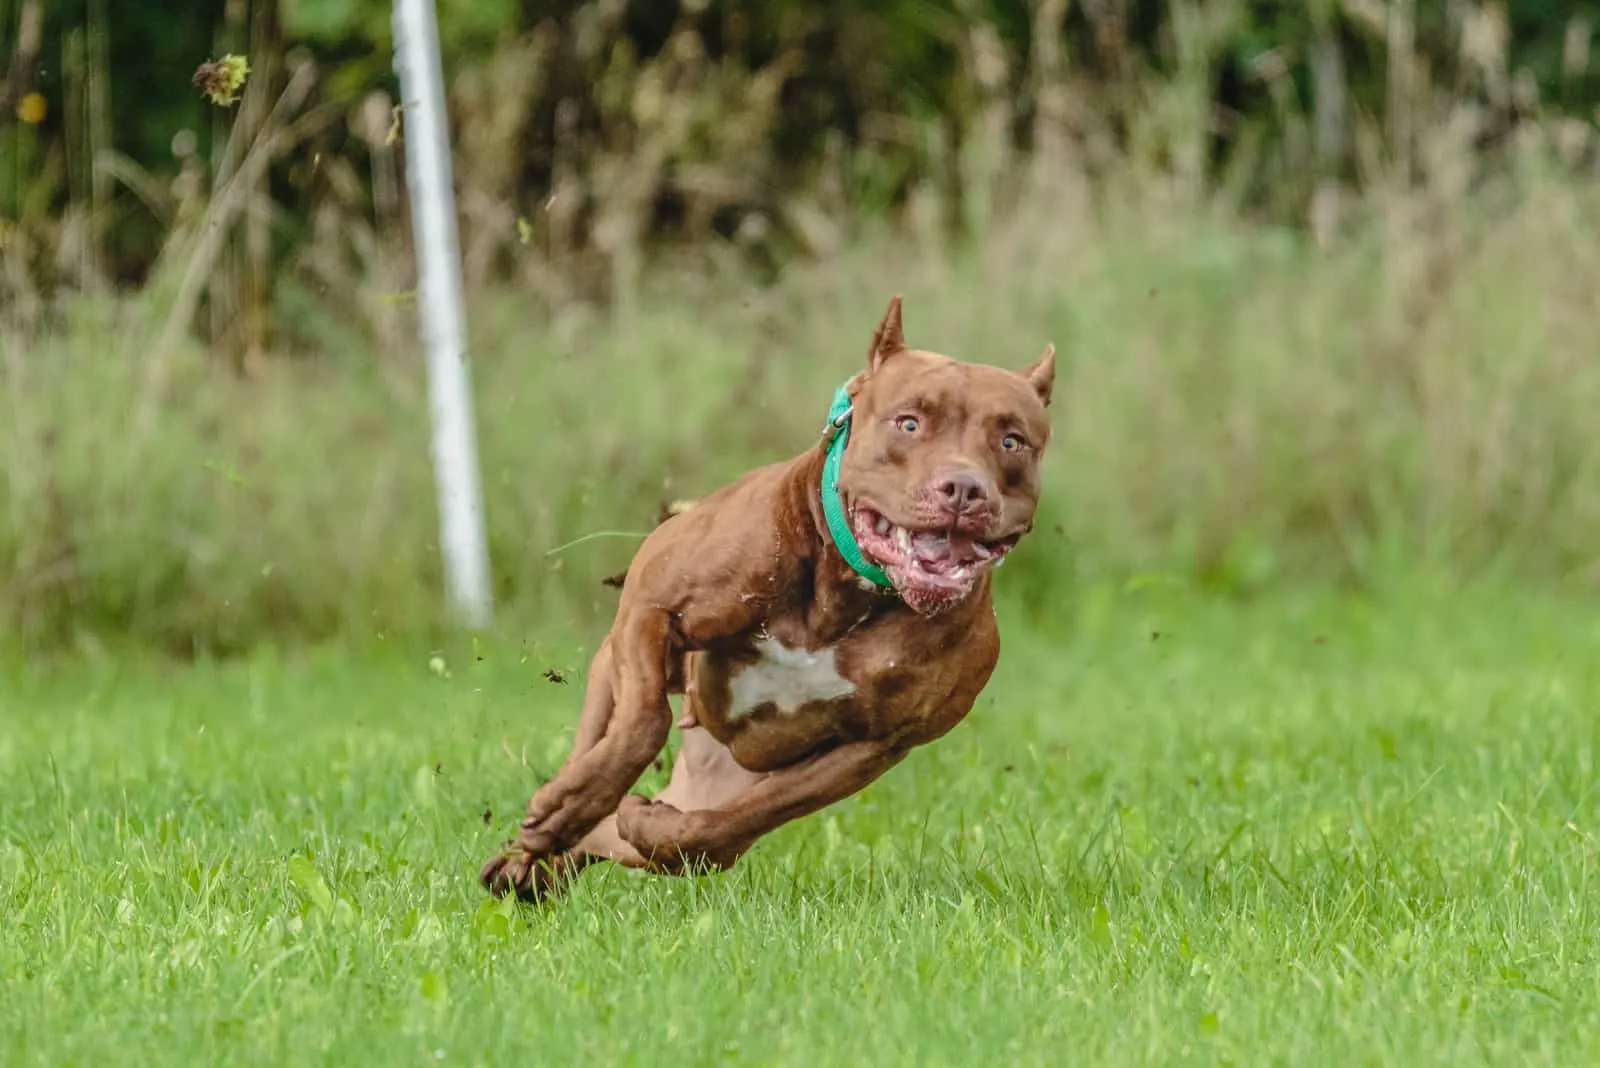 American Pit Bull Terrier running in the field